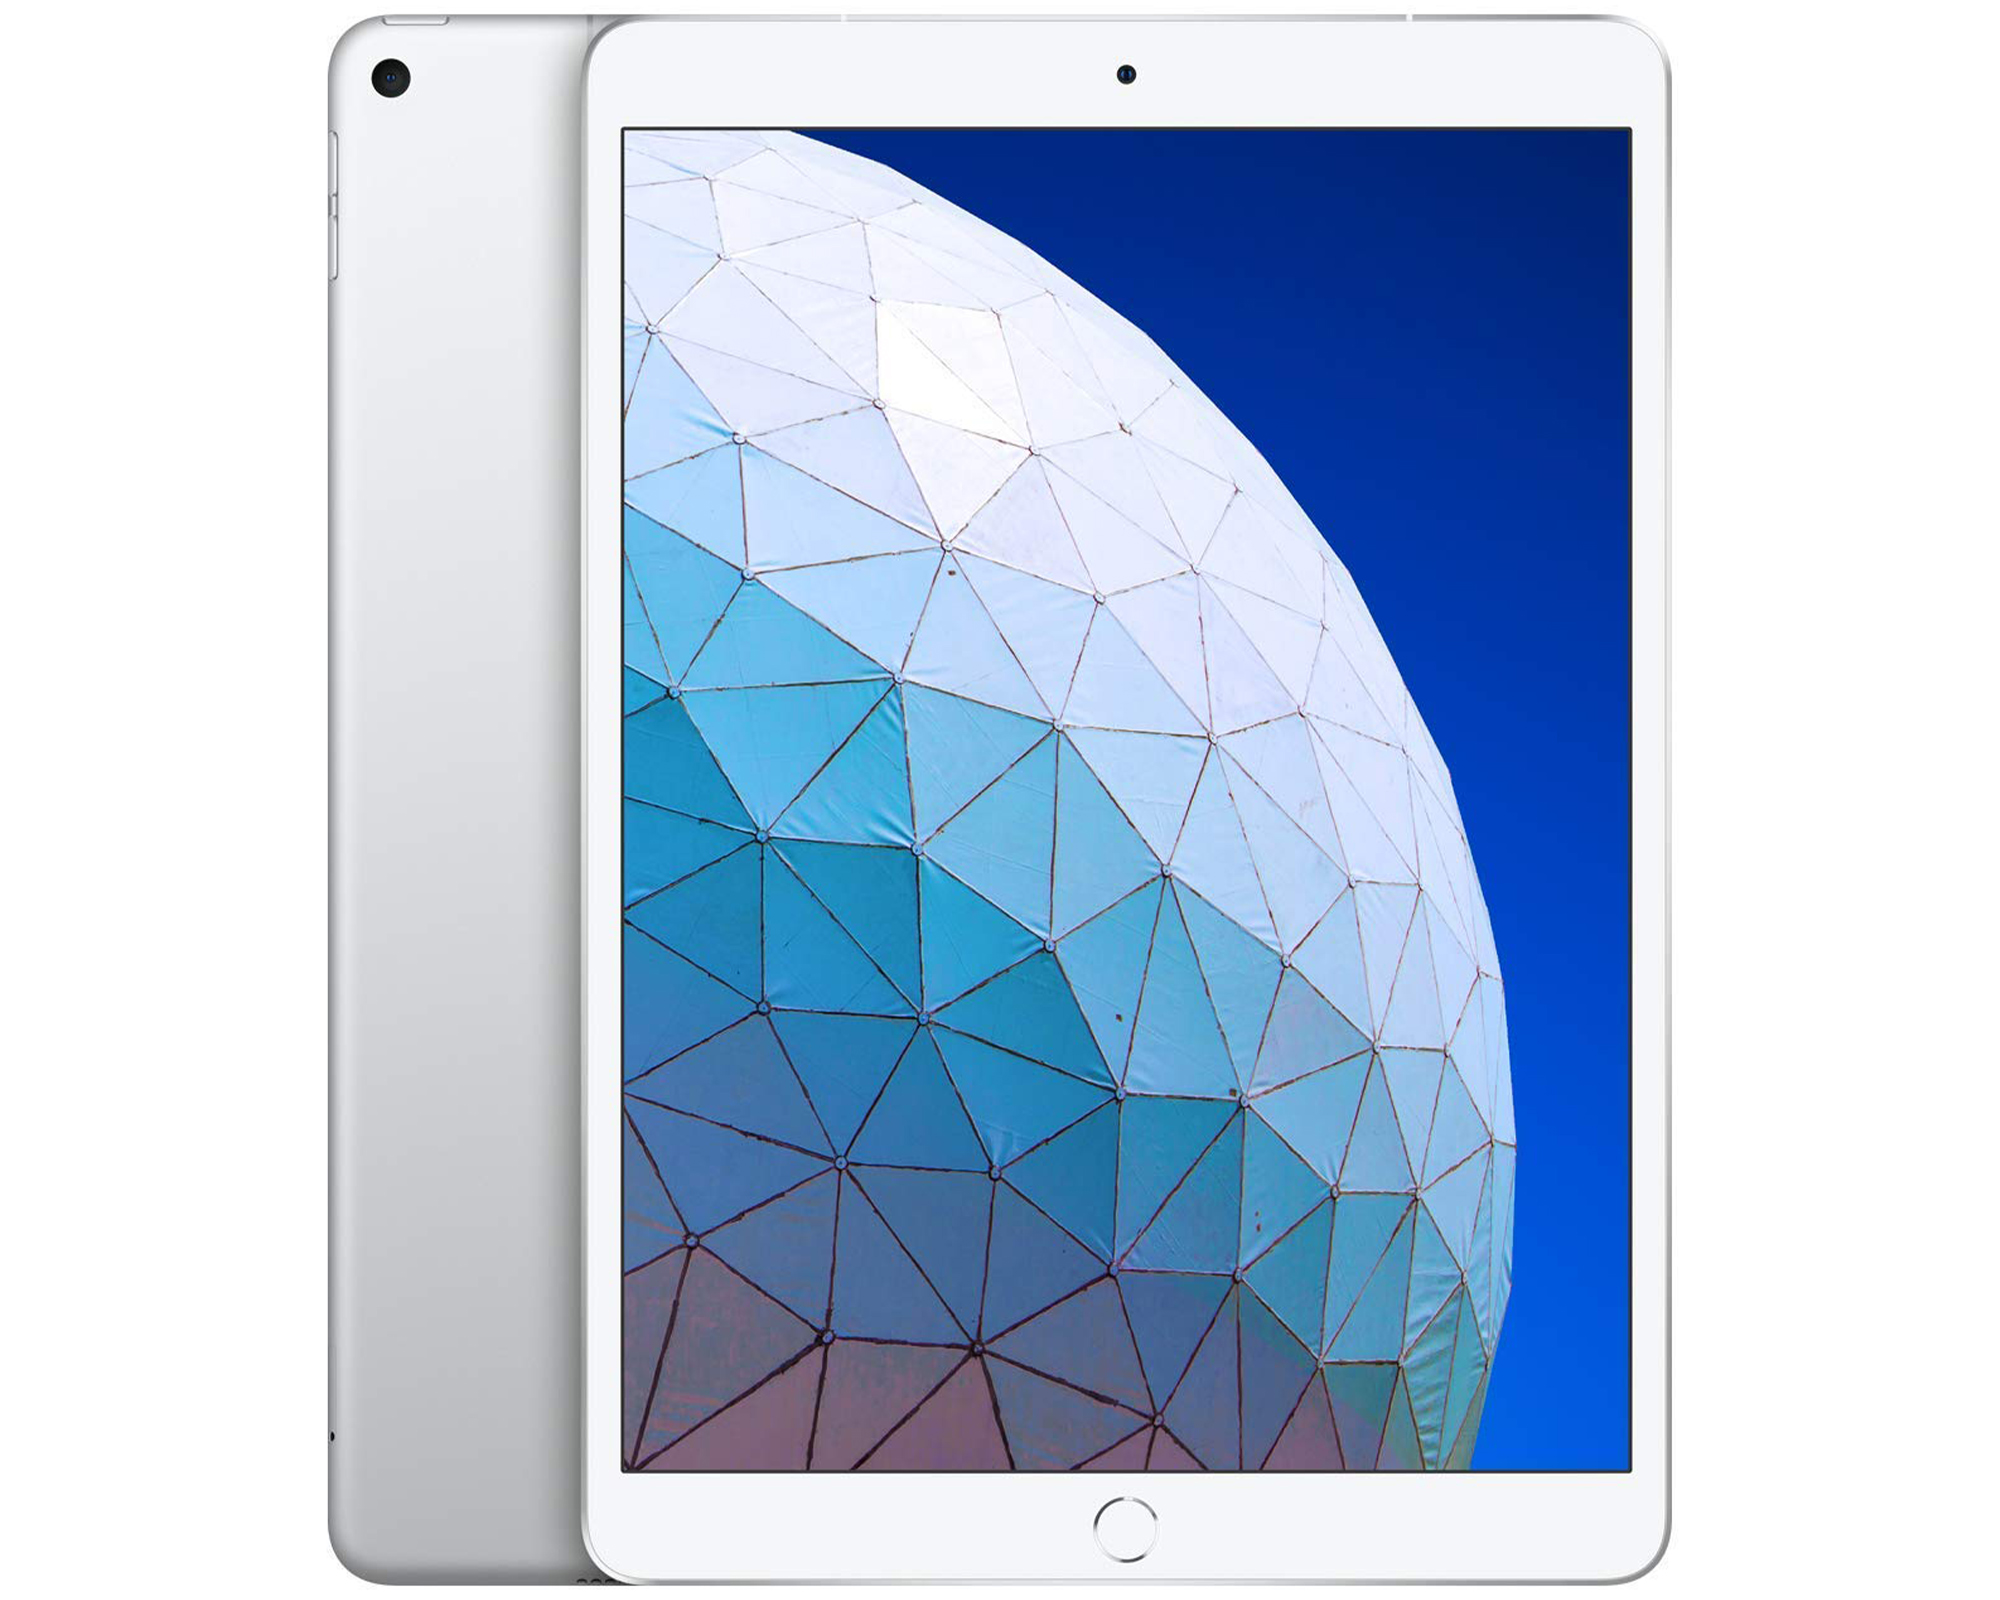 Open Box | Apple iPad Air 3 | 10.5-inch Retina Display | 64GB | Latest OS, Wi-Fi Only, Bundle: Case, Pre-Installed Tempered Glass, Bluetooth Headset, Stylus Pen, Rapid Charger - image 4 of 12